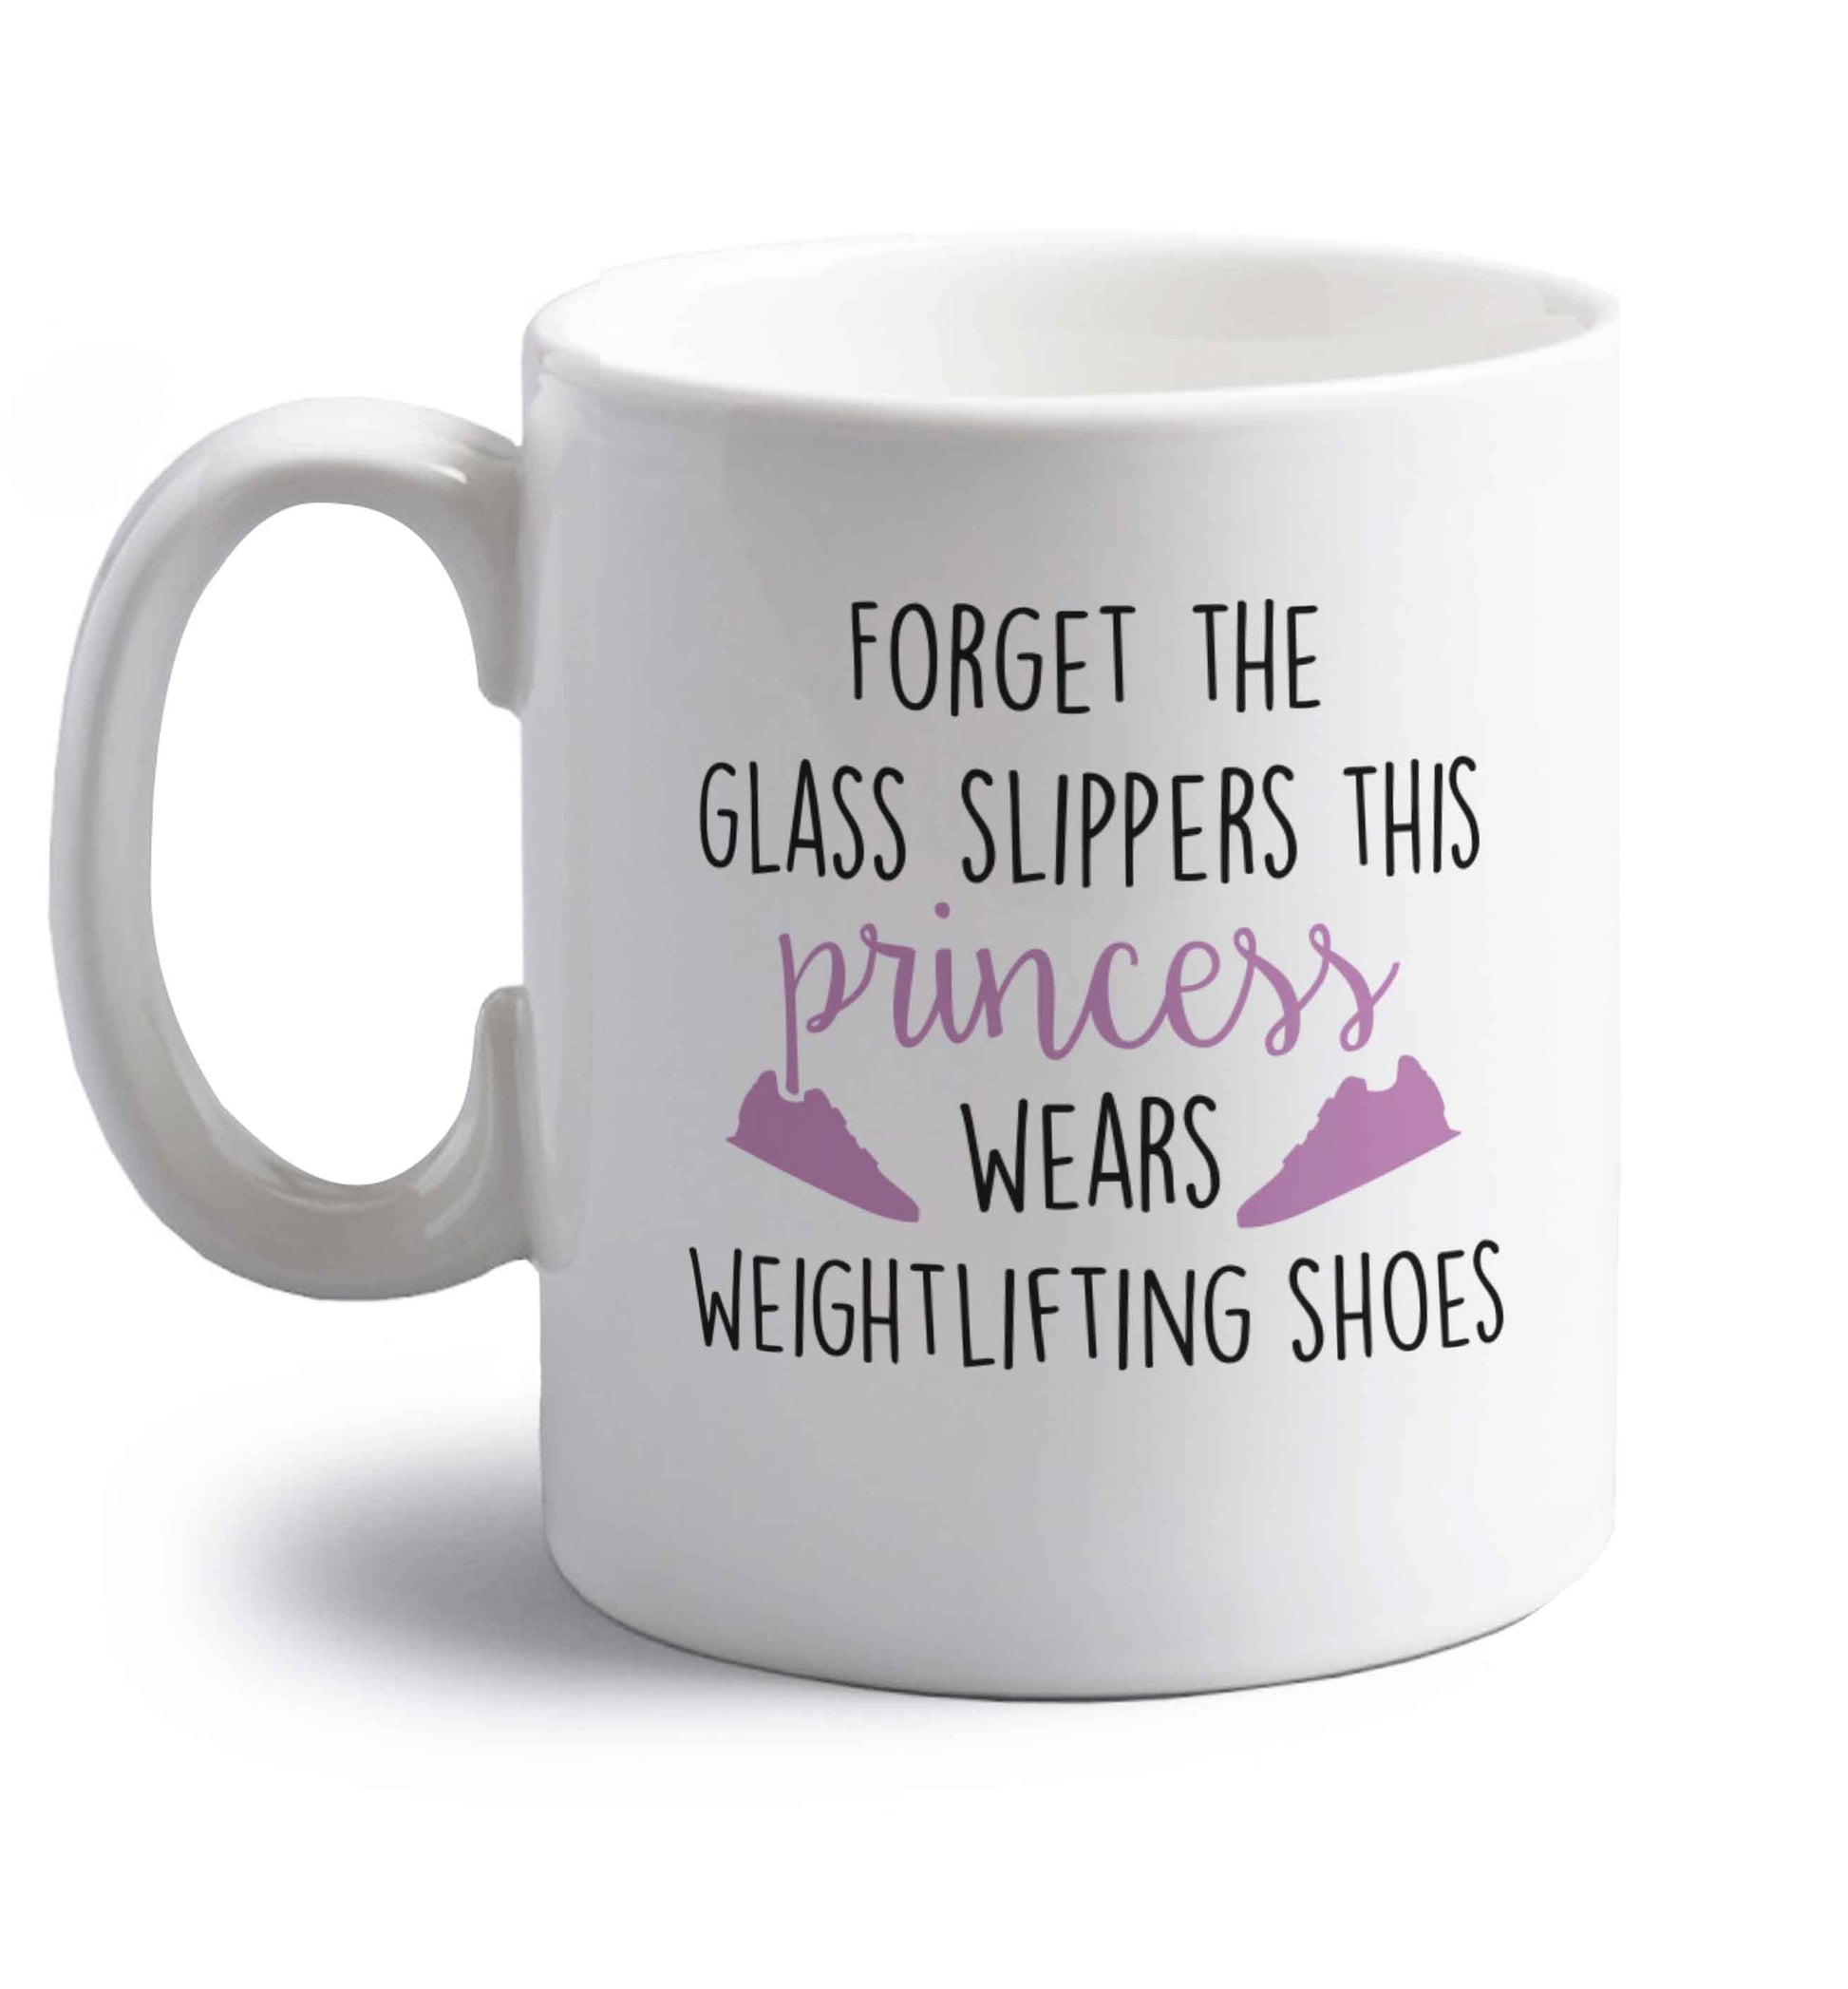 Forget the glass slippers this princess wears weightlifting shoes right handed white ceramic mug 